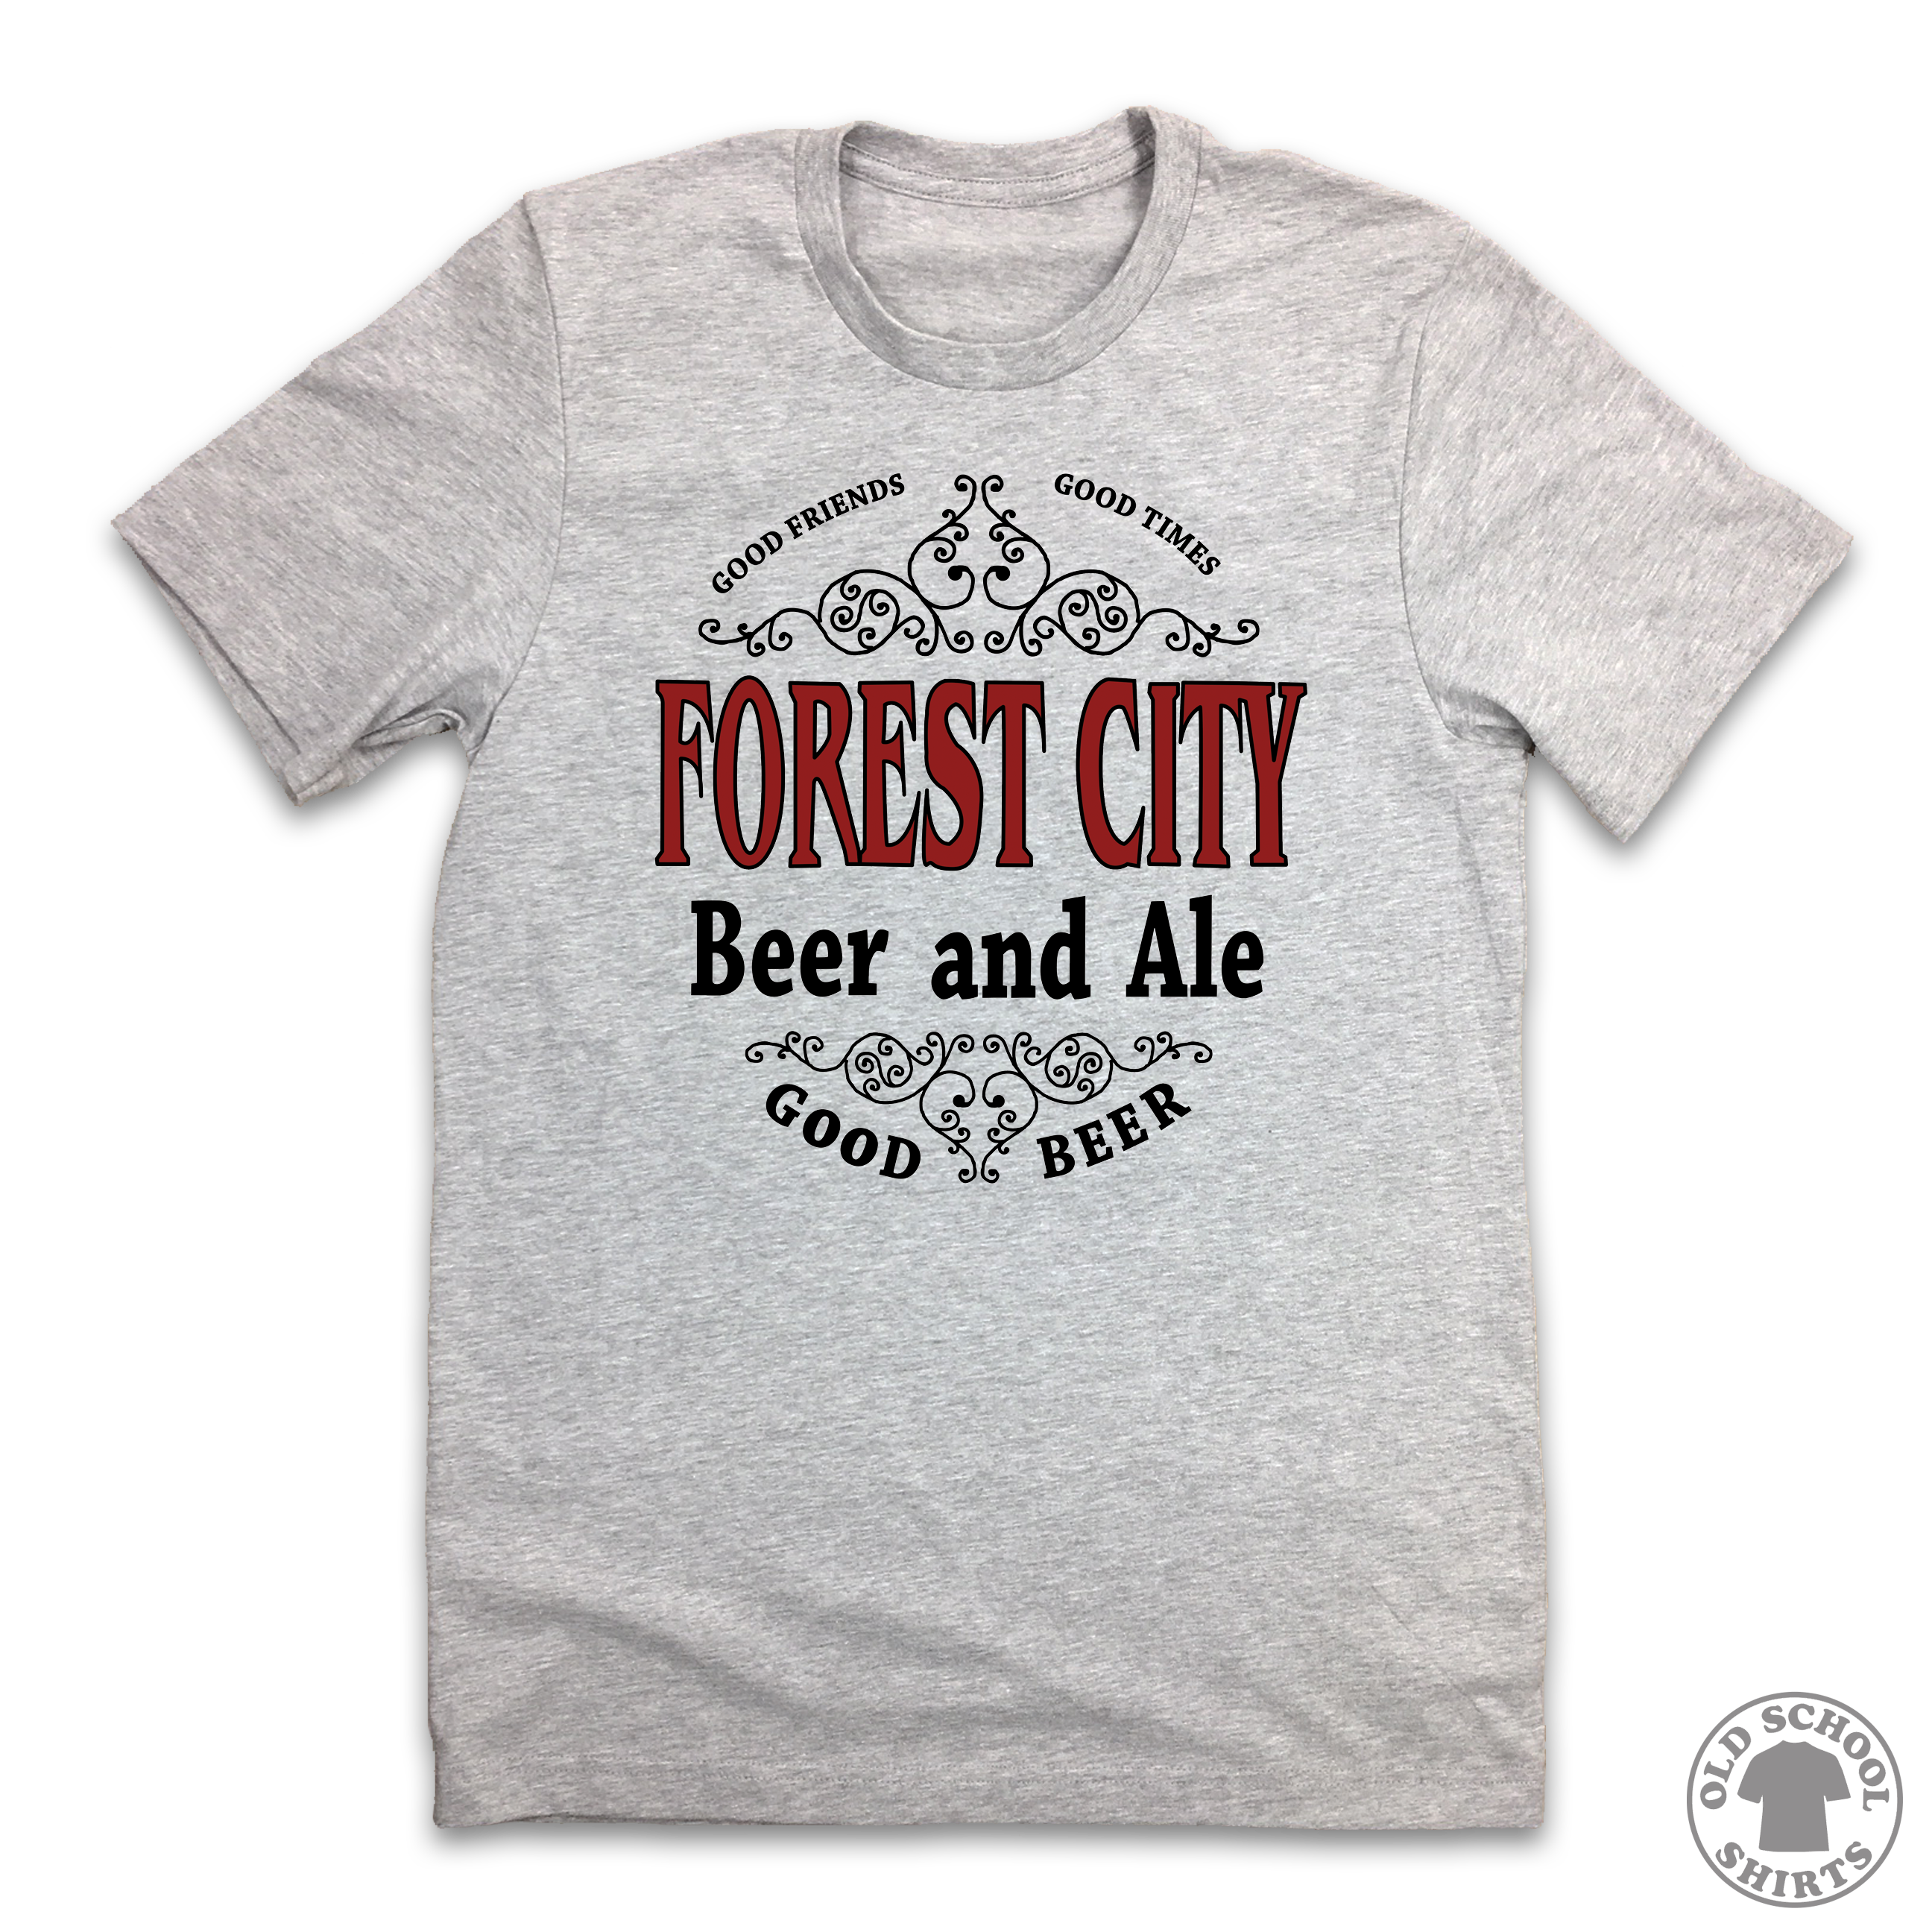 Forest City Ale and Beer - Old School Shirts- Retro Sports T Shirts